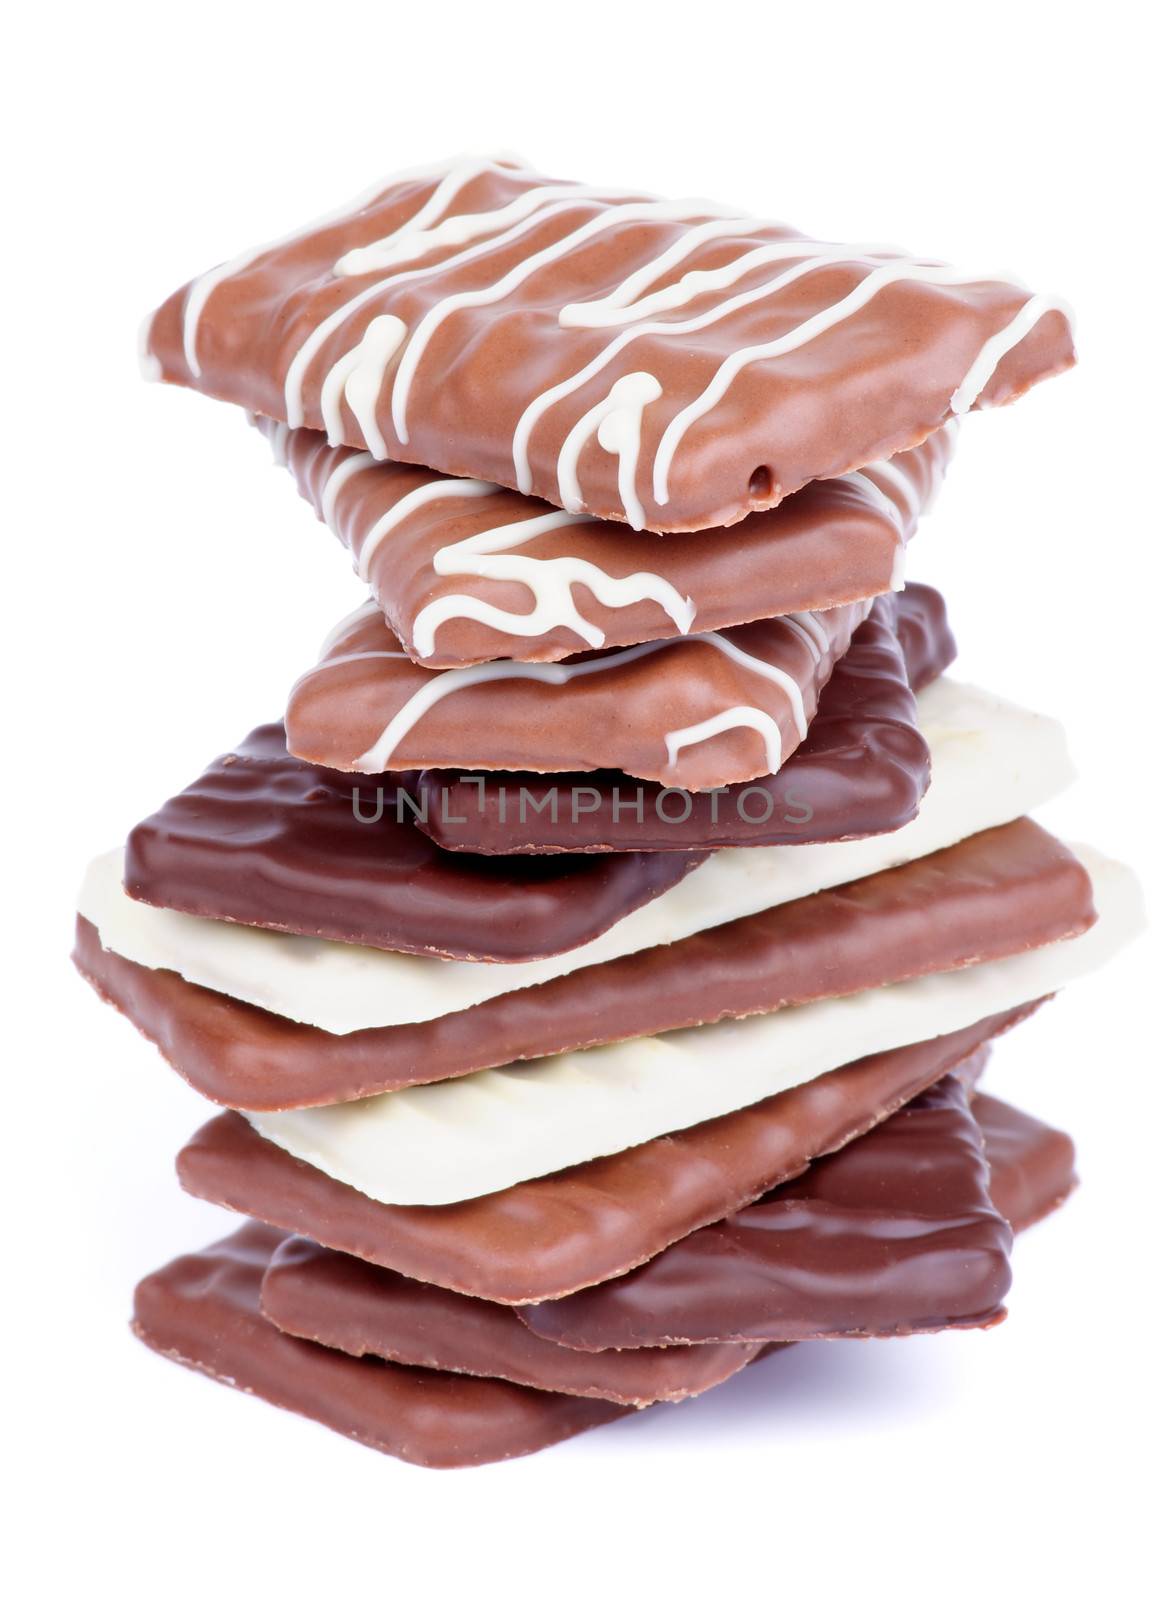 Pile of Chocolate Biscuits with Dark, Milk and White Chocolate Glazed isolated on white background